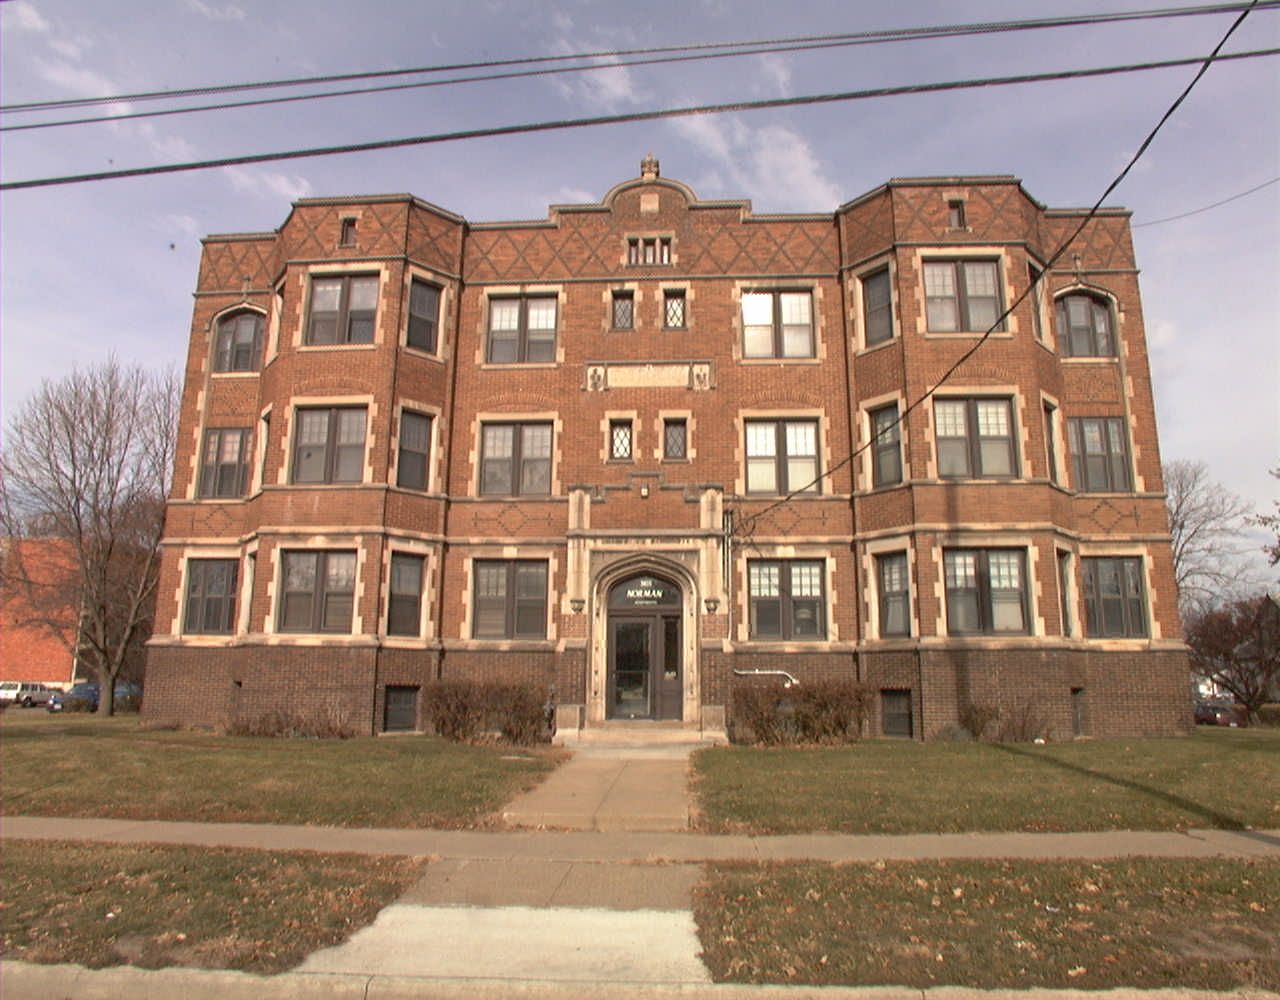 A photo of the Norman Apartment building in Des Moines.